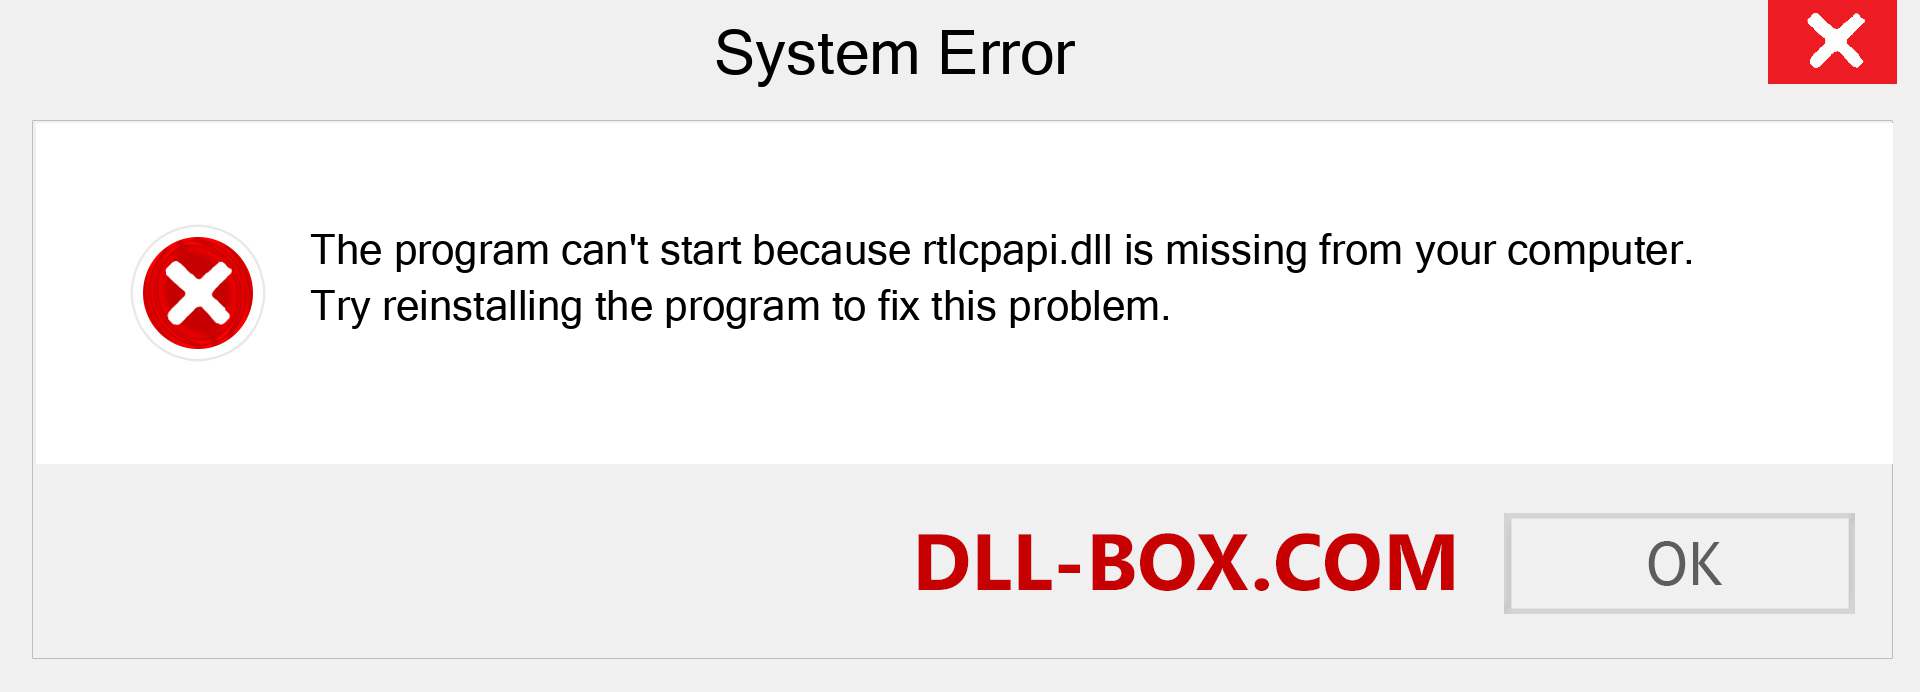  rtlcpapi.dll file is missing?. Download for Windows 7, 8, 10 - Fix  rtlcpapi dll Missing Error on Windows, photos, images